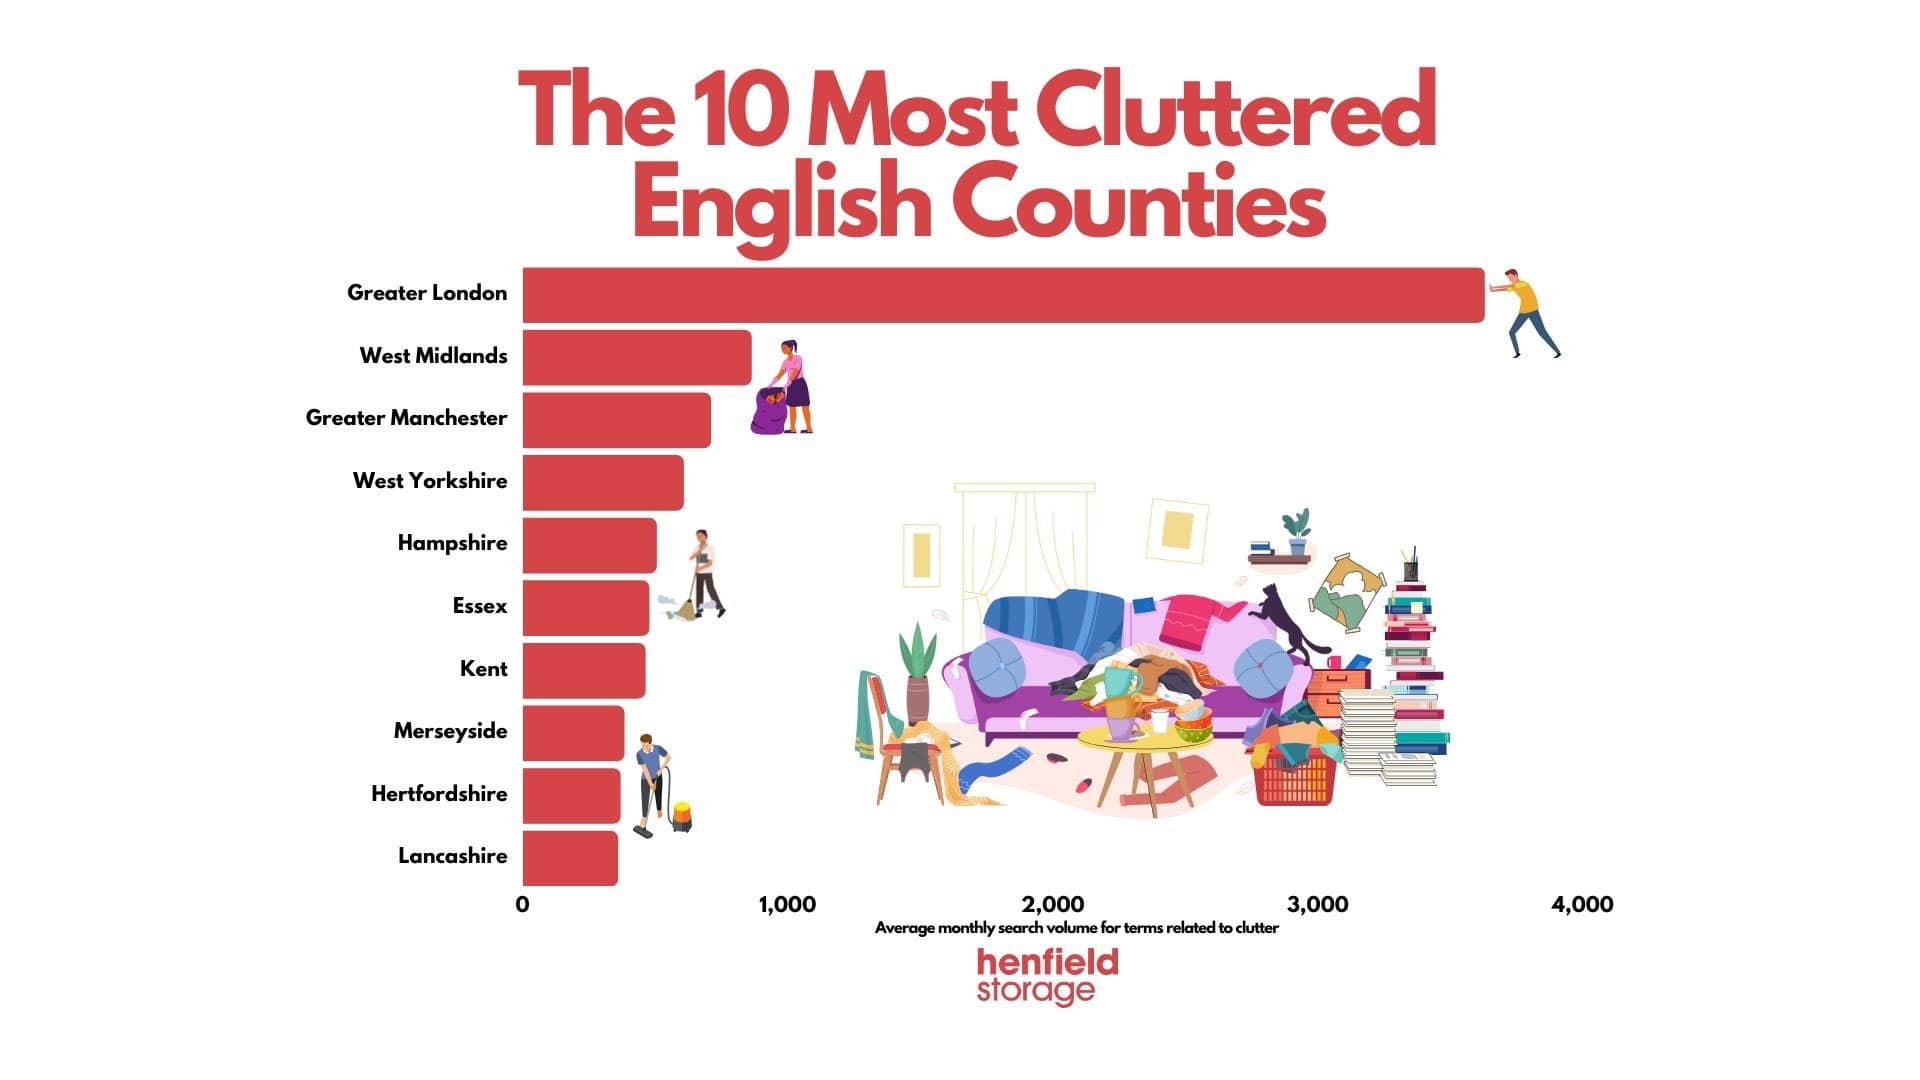 Find out the 10 most cluttered English counties